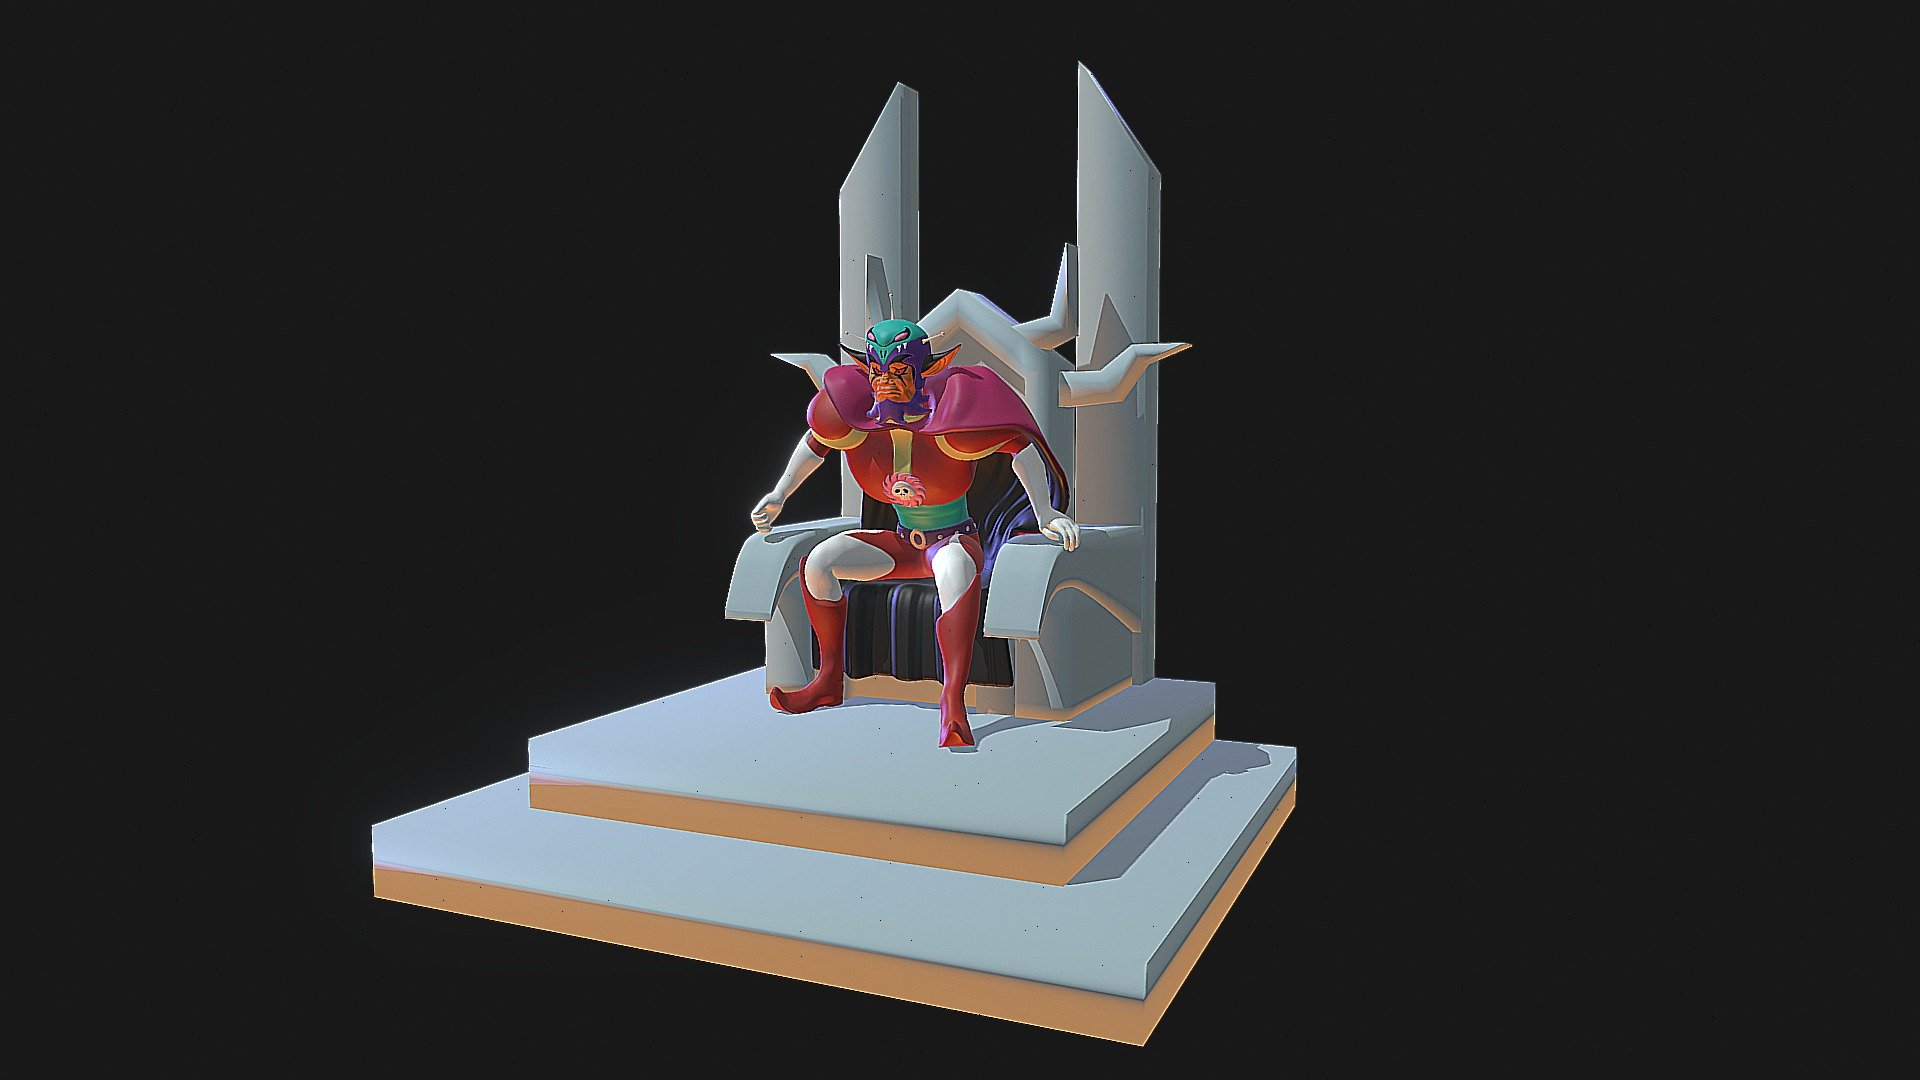 Made in Zbrush.
Already split for 3Dprint. The file is merged down 3d model